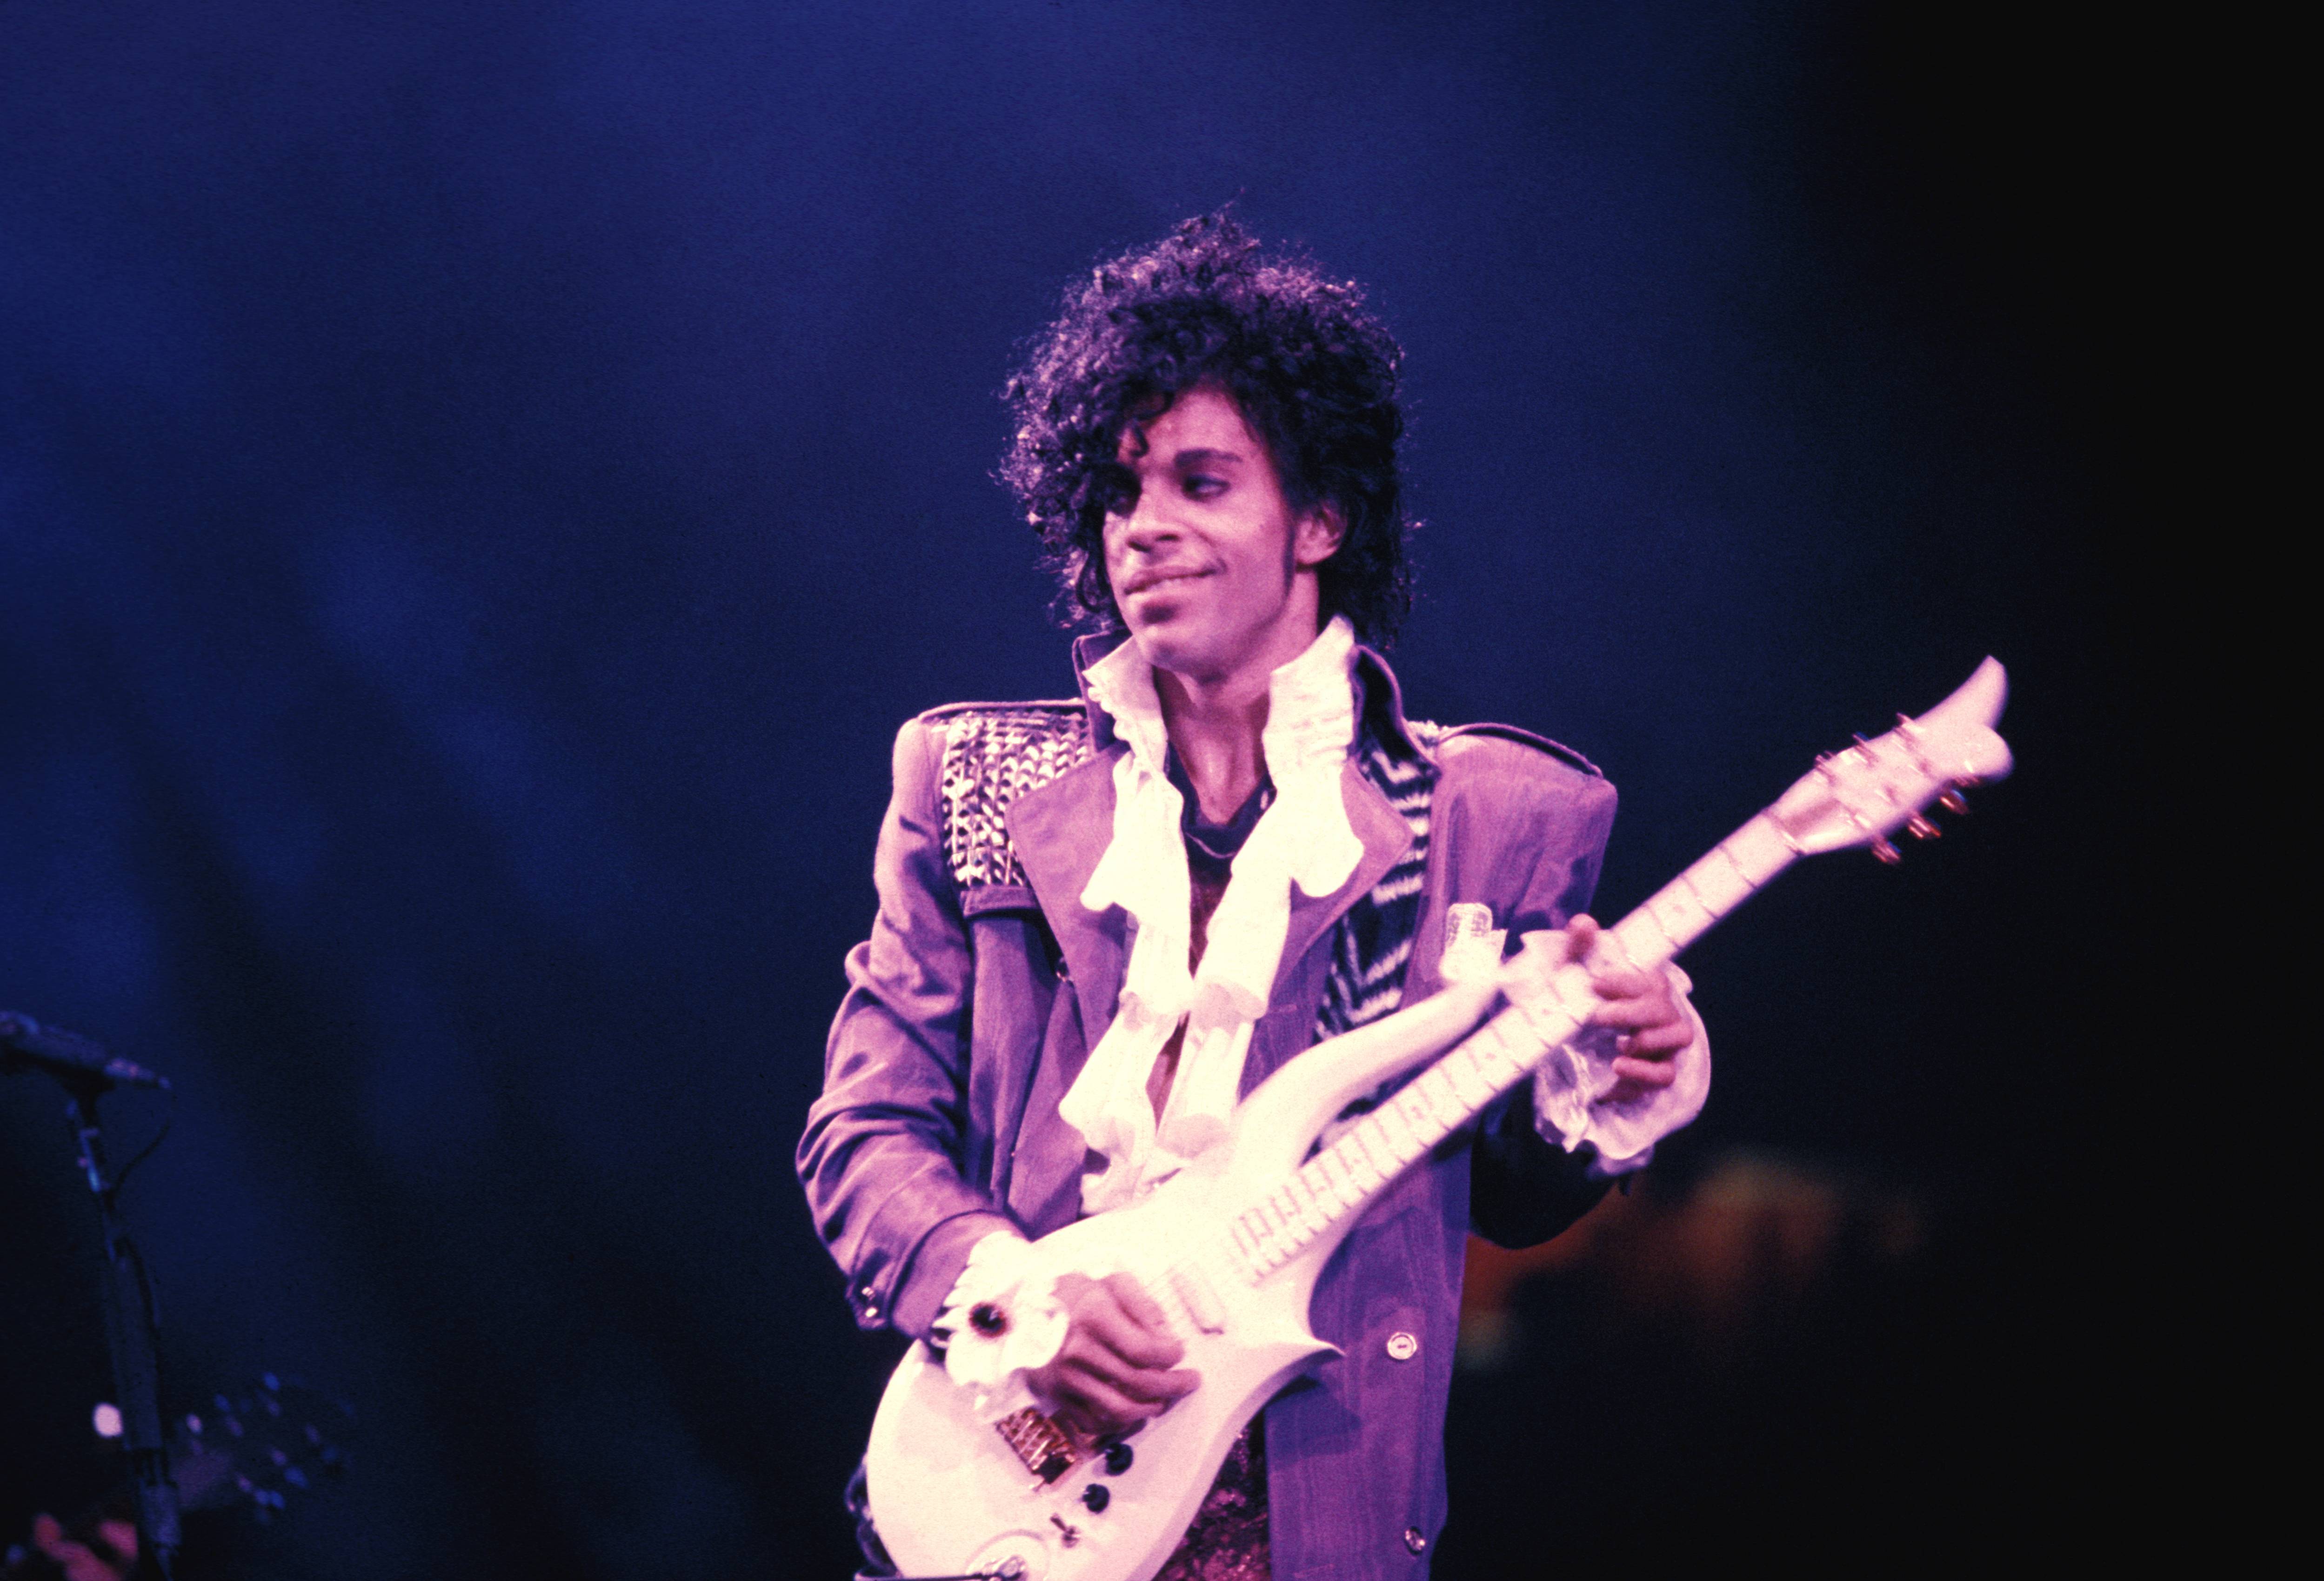 How the Prince Sales Spike Compares to Other Icons After Their Deaths